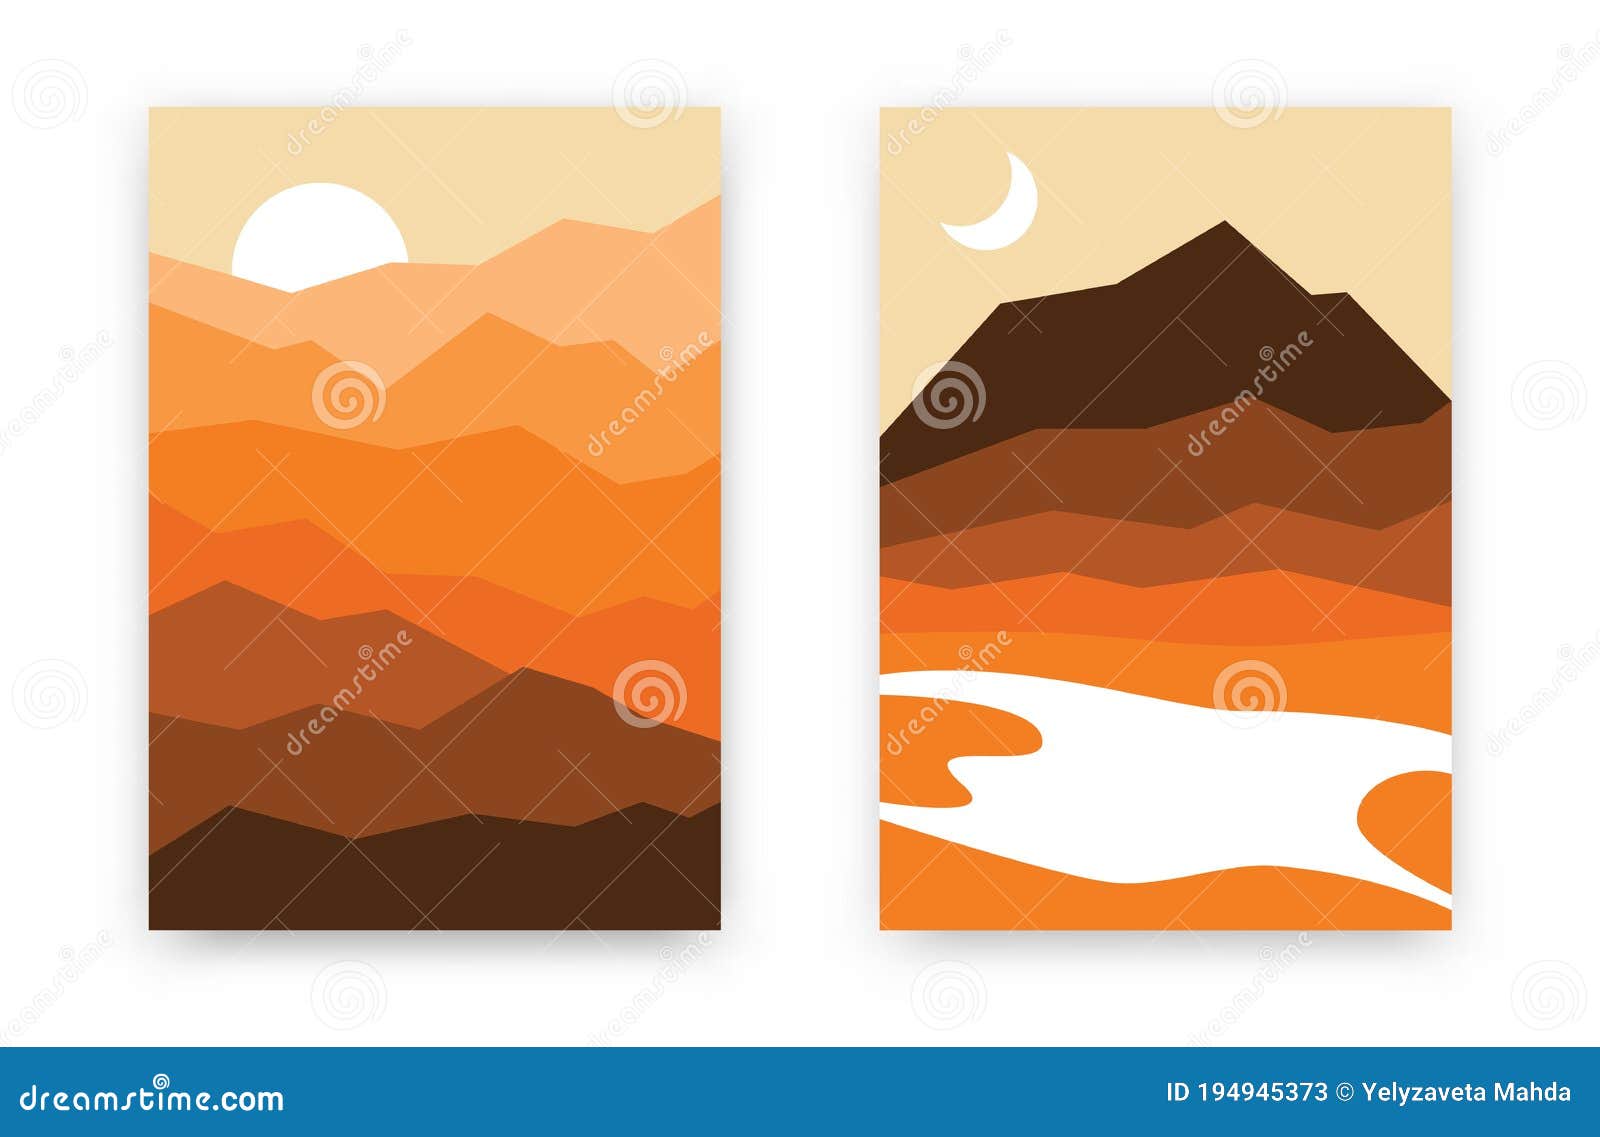 Abstract Mountain Backgrounds. Set of Hand Drawn Posters with Hills ...